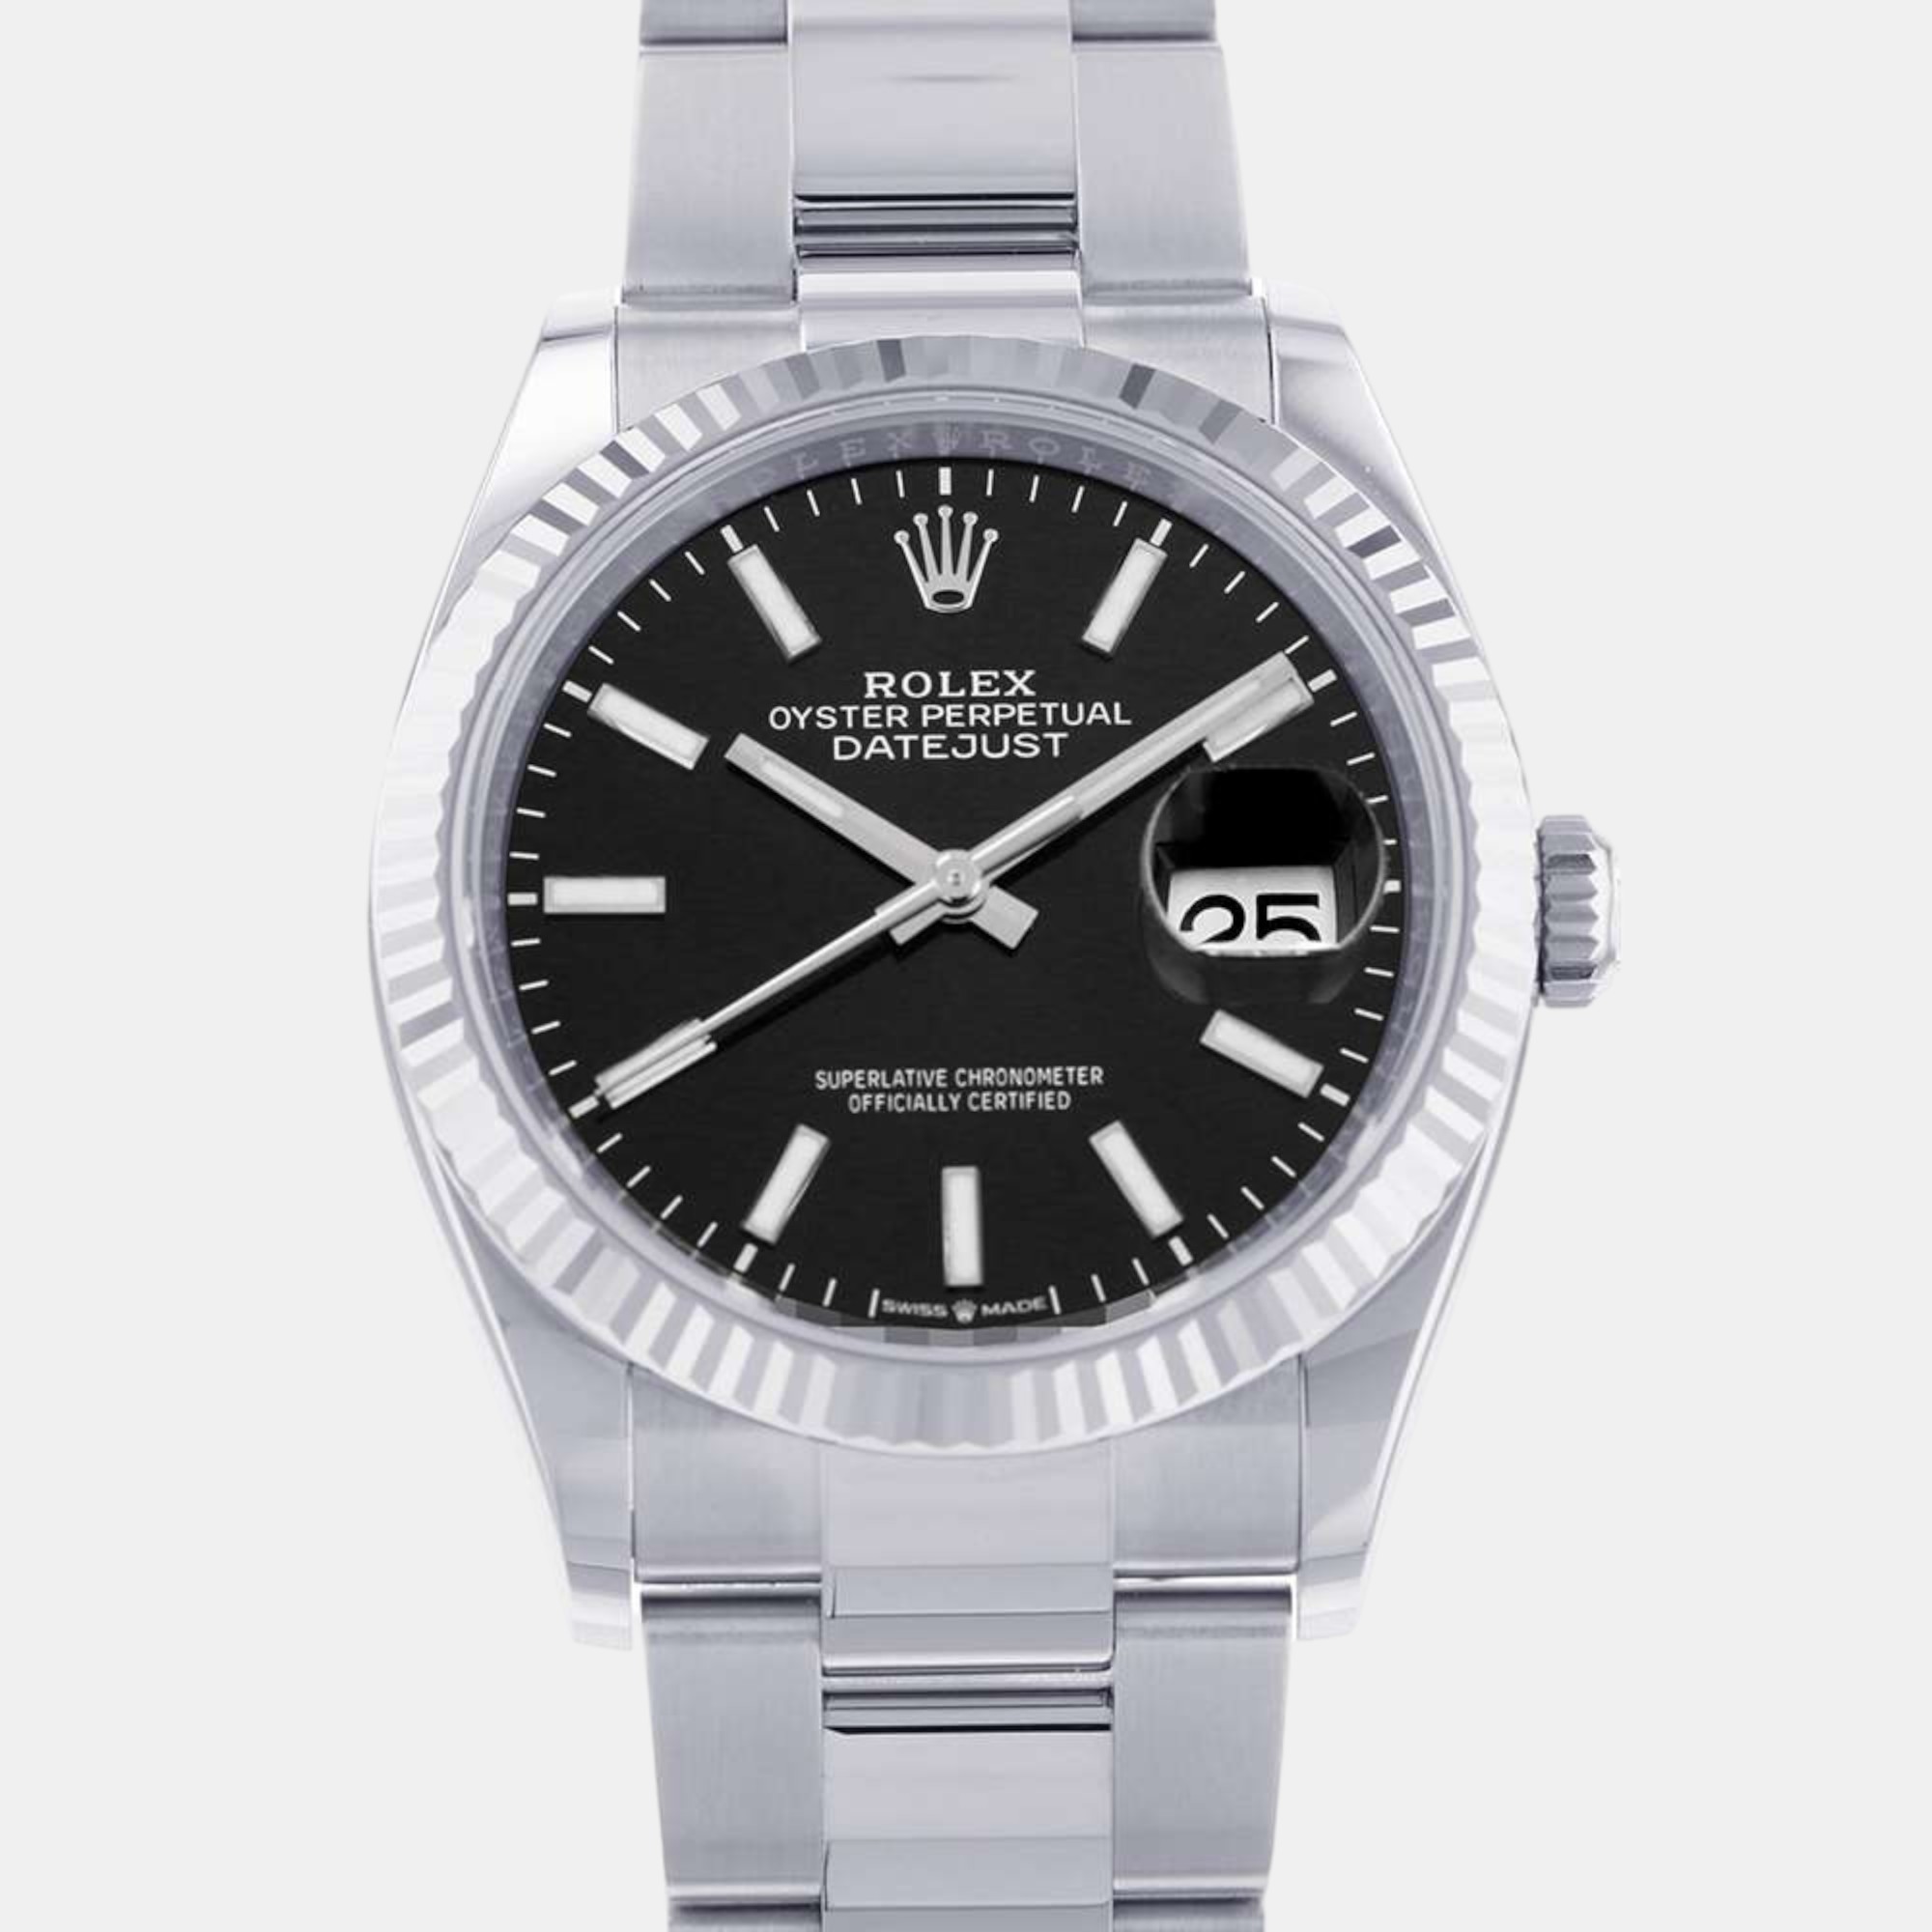 Rolex black 18k white gold stainless steel datejust automatic men's wristwatch 36 mm